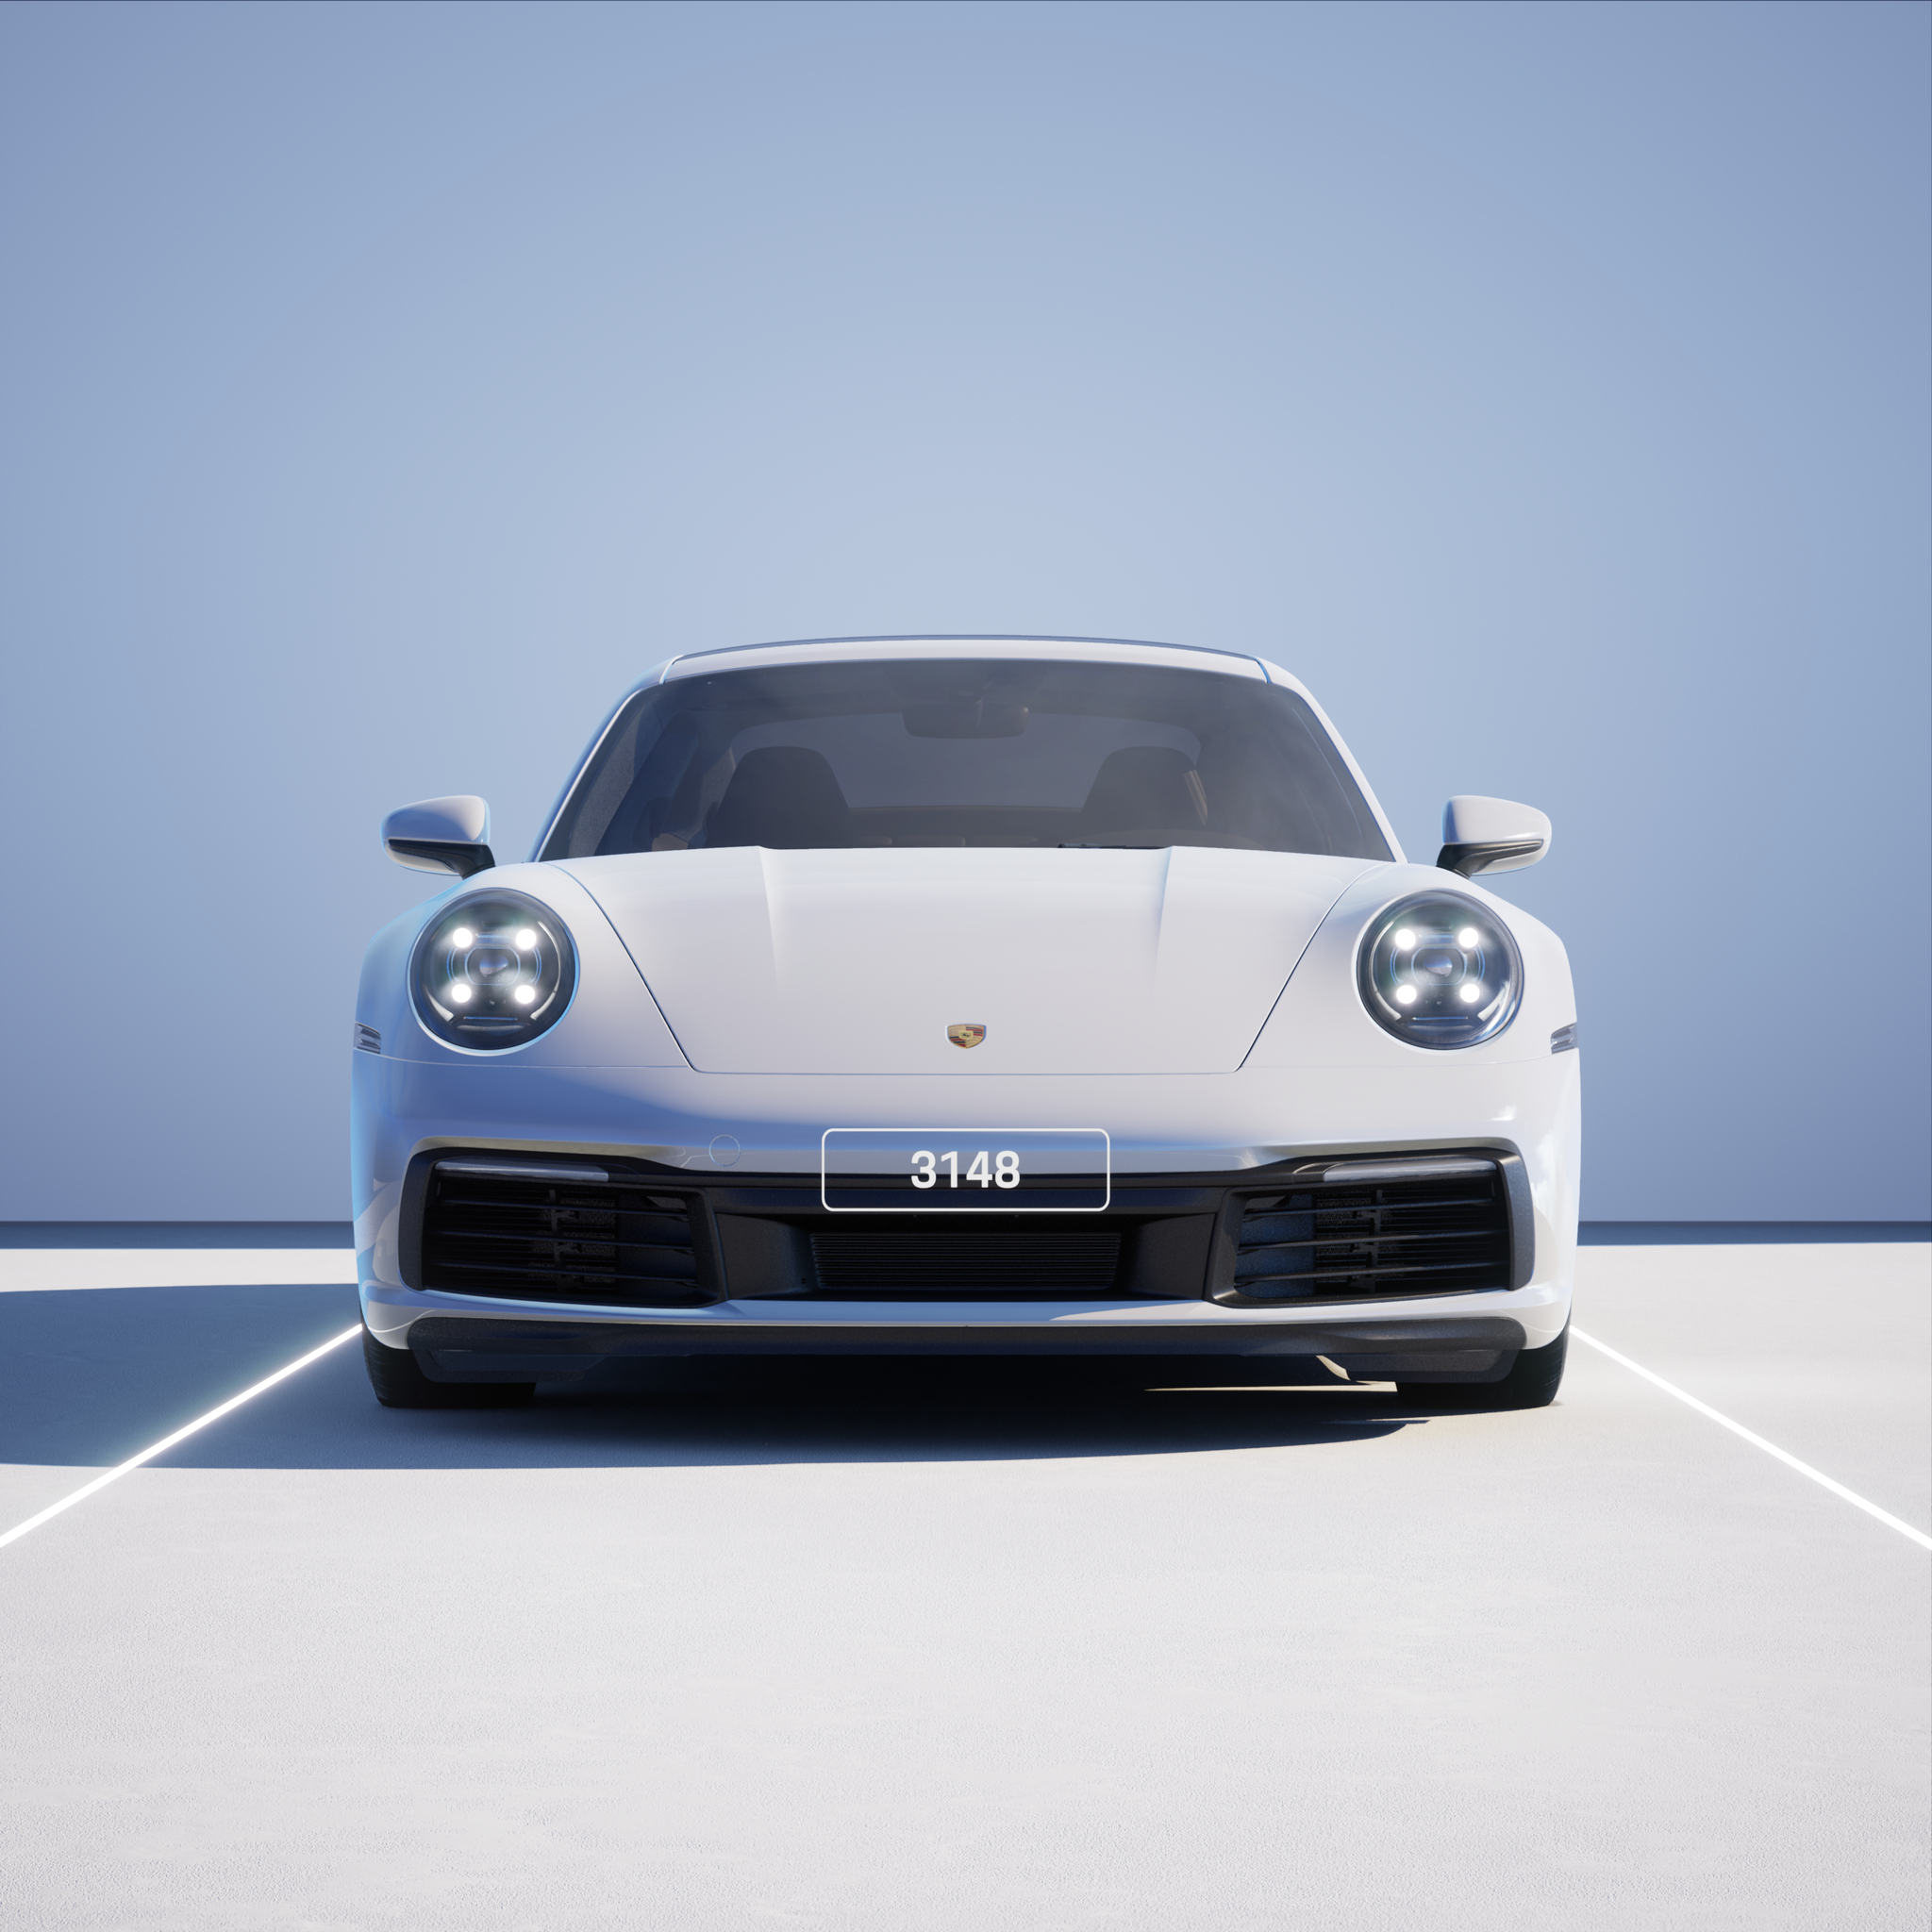 The PORSCHΞ 911 3148 image in phase